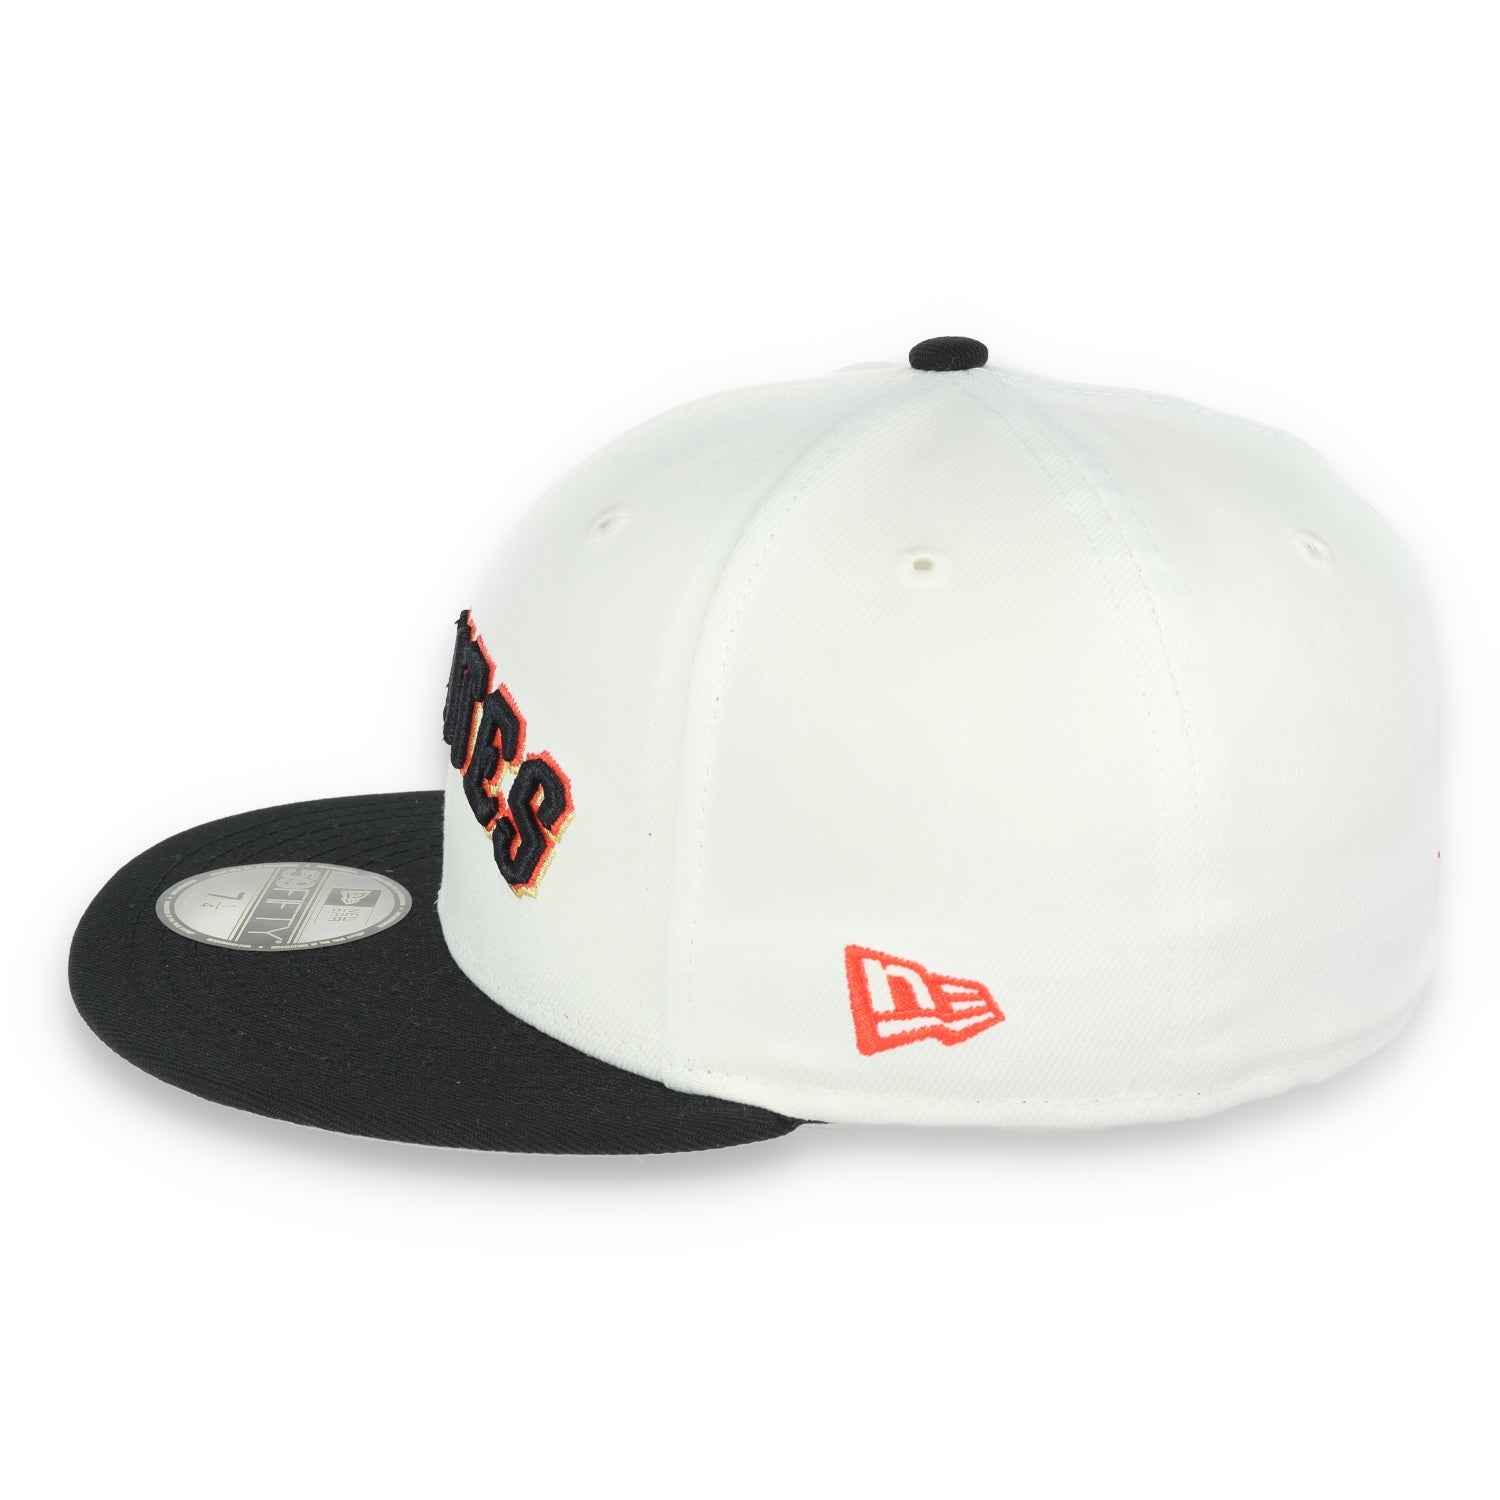 New Era San Francisco Giants "Gigantes" 50th Anniversary Side Patch 59IFTY Fitted hat- Chrome